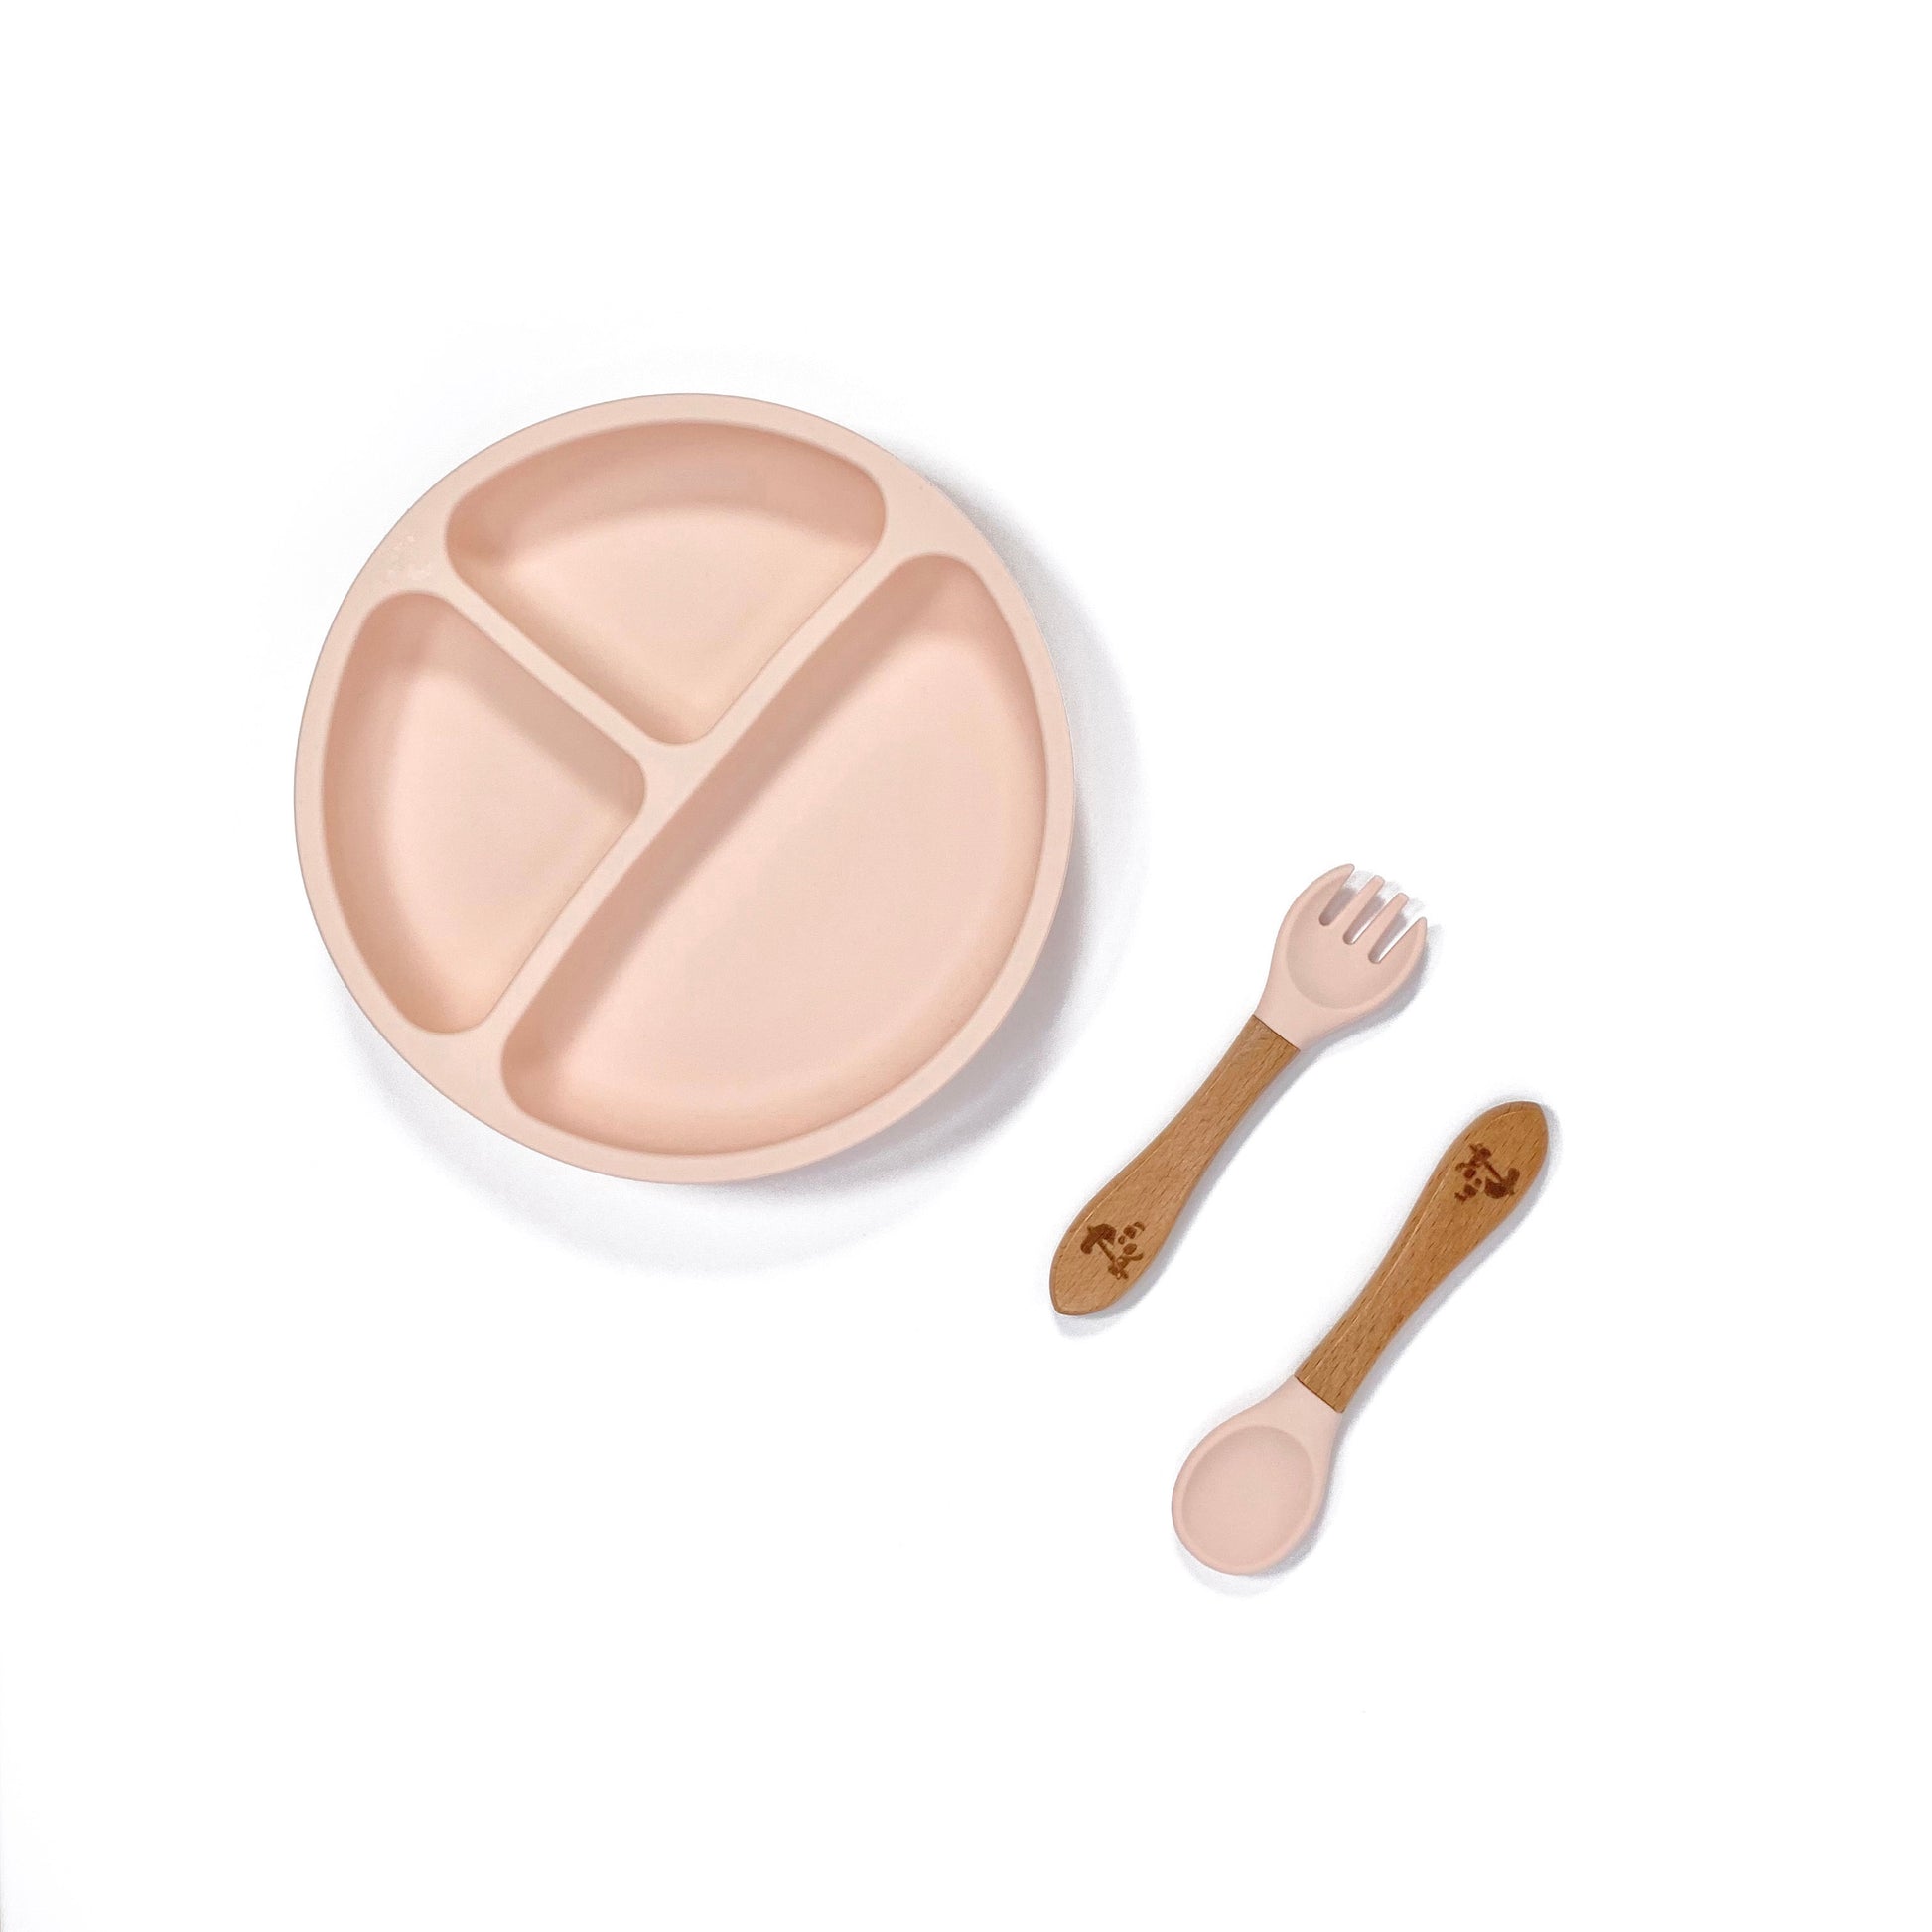 A peachy pink silicone children’s section plate with cups on the base, and matching bamboo and silicone cutlery.